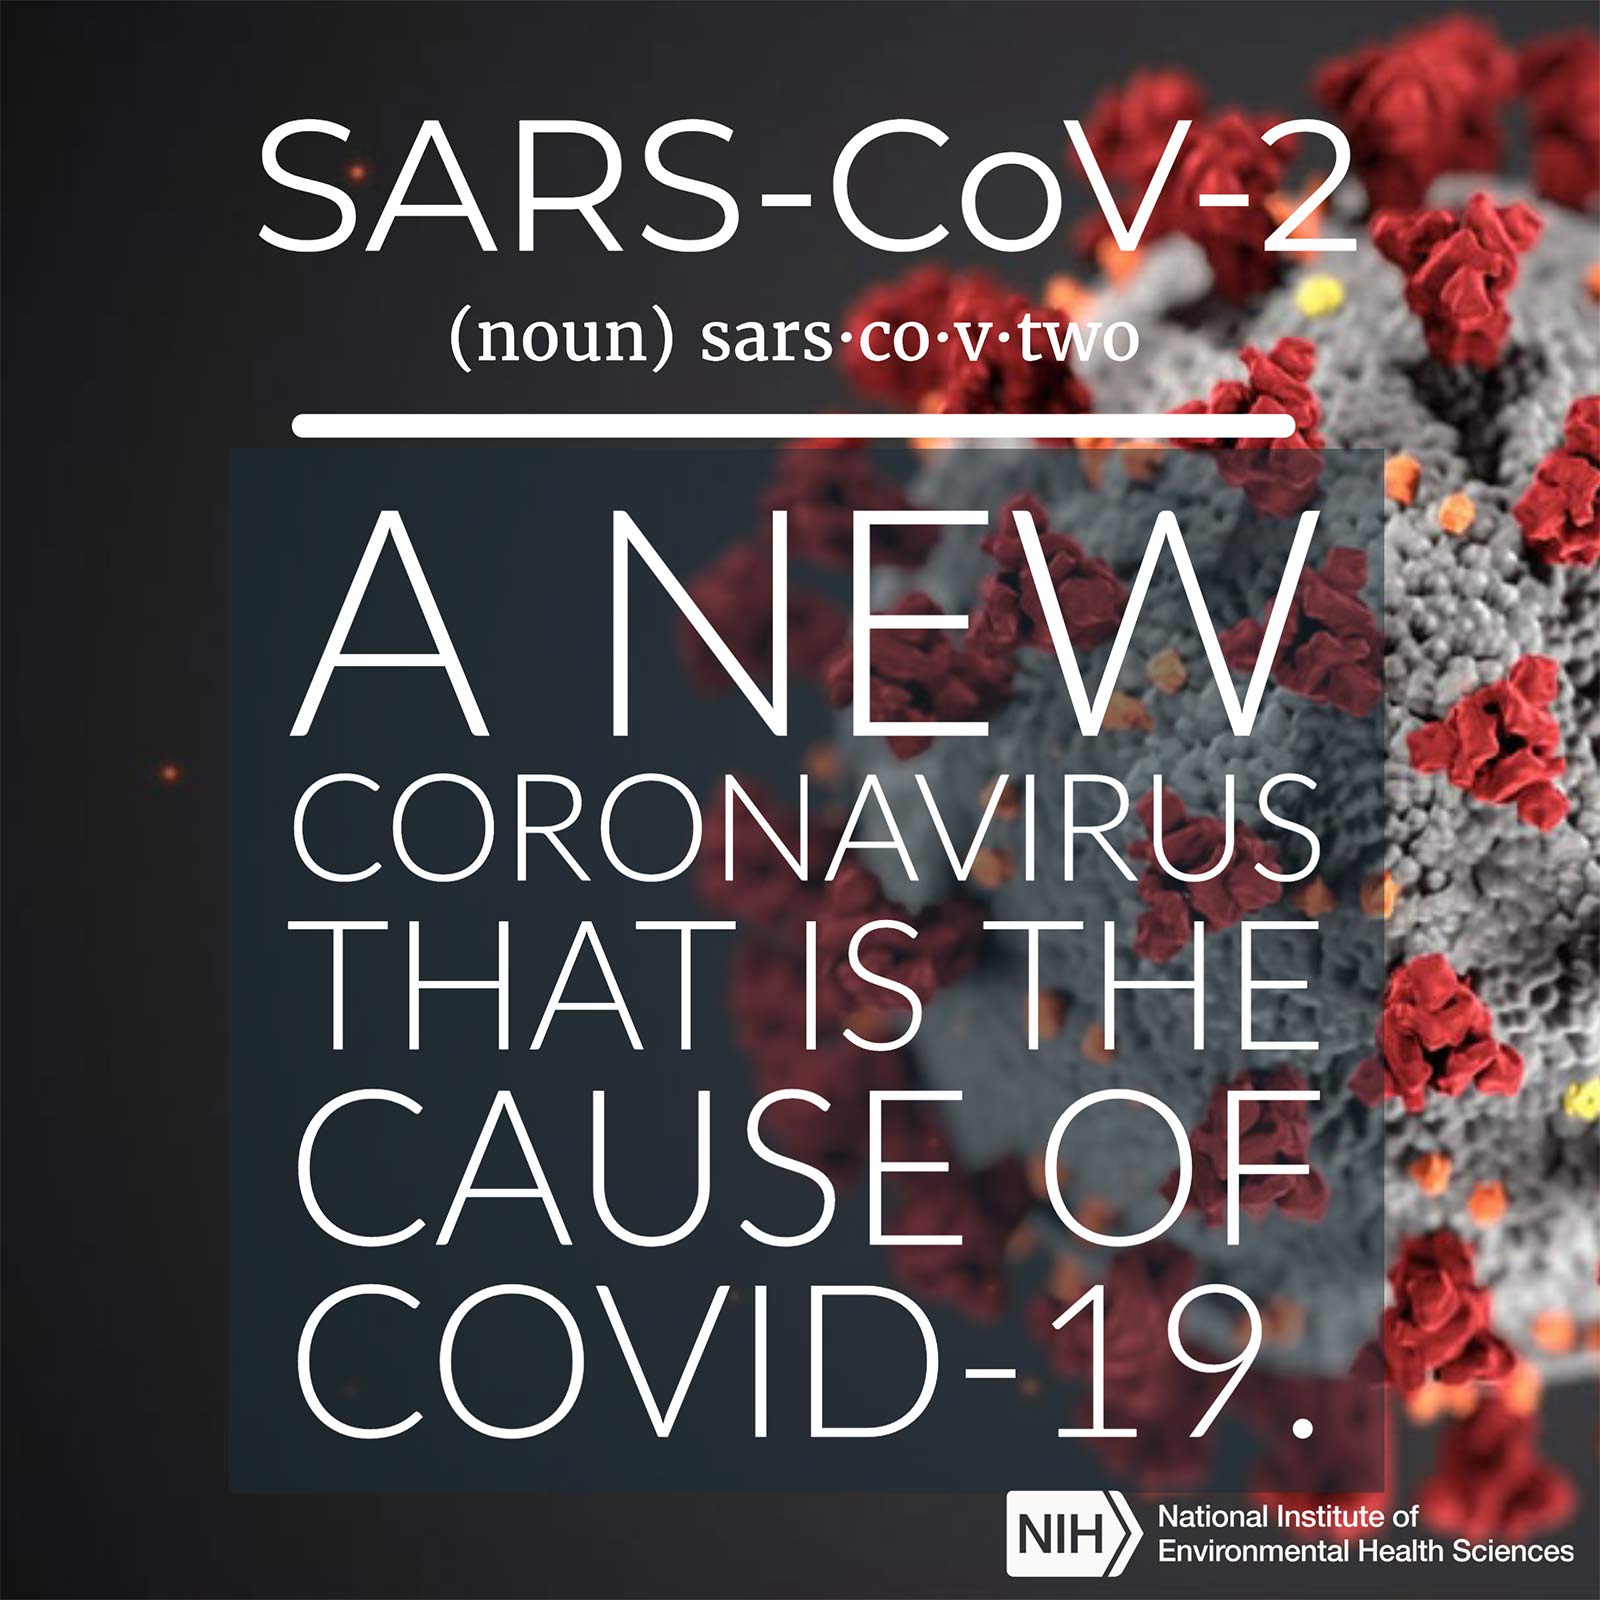 SARS-CoV-2 (noun) defined as 'a new coronavirus that is the cause of COVID-19.'